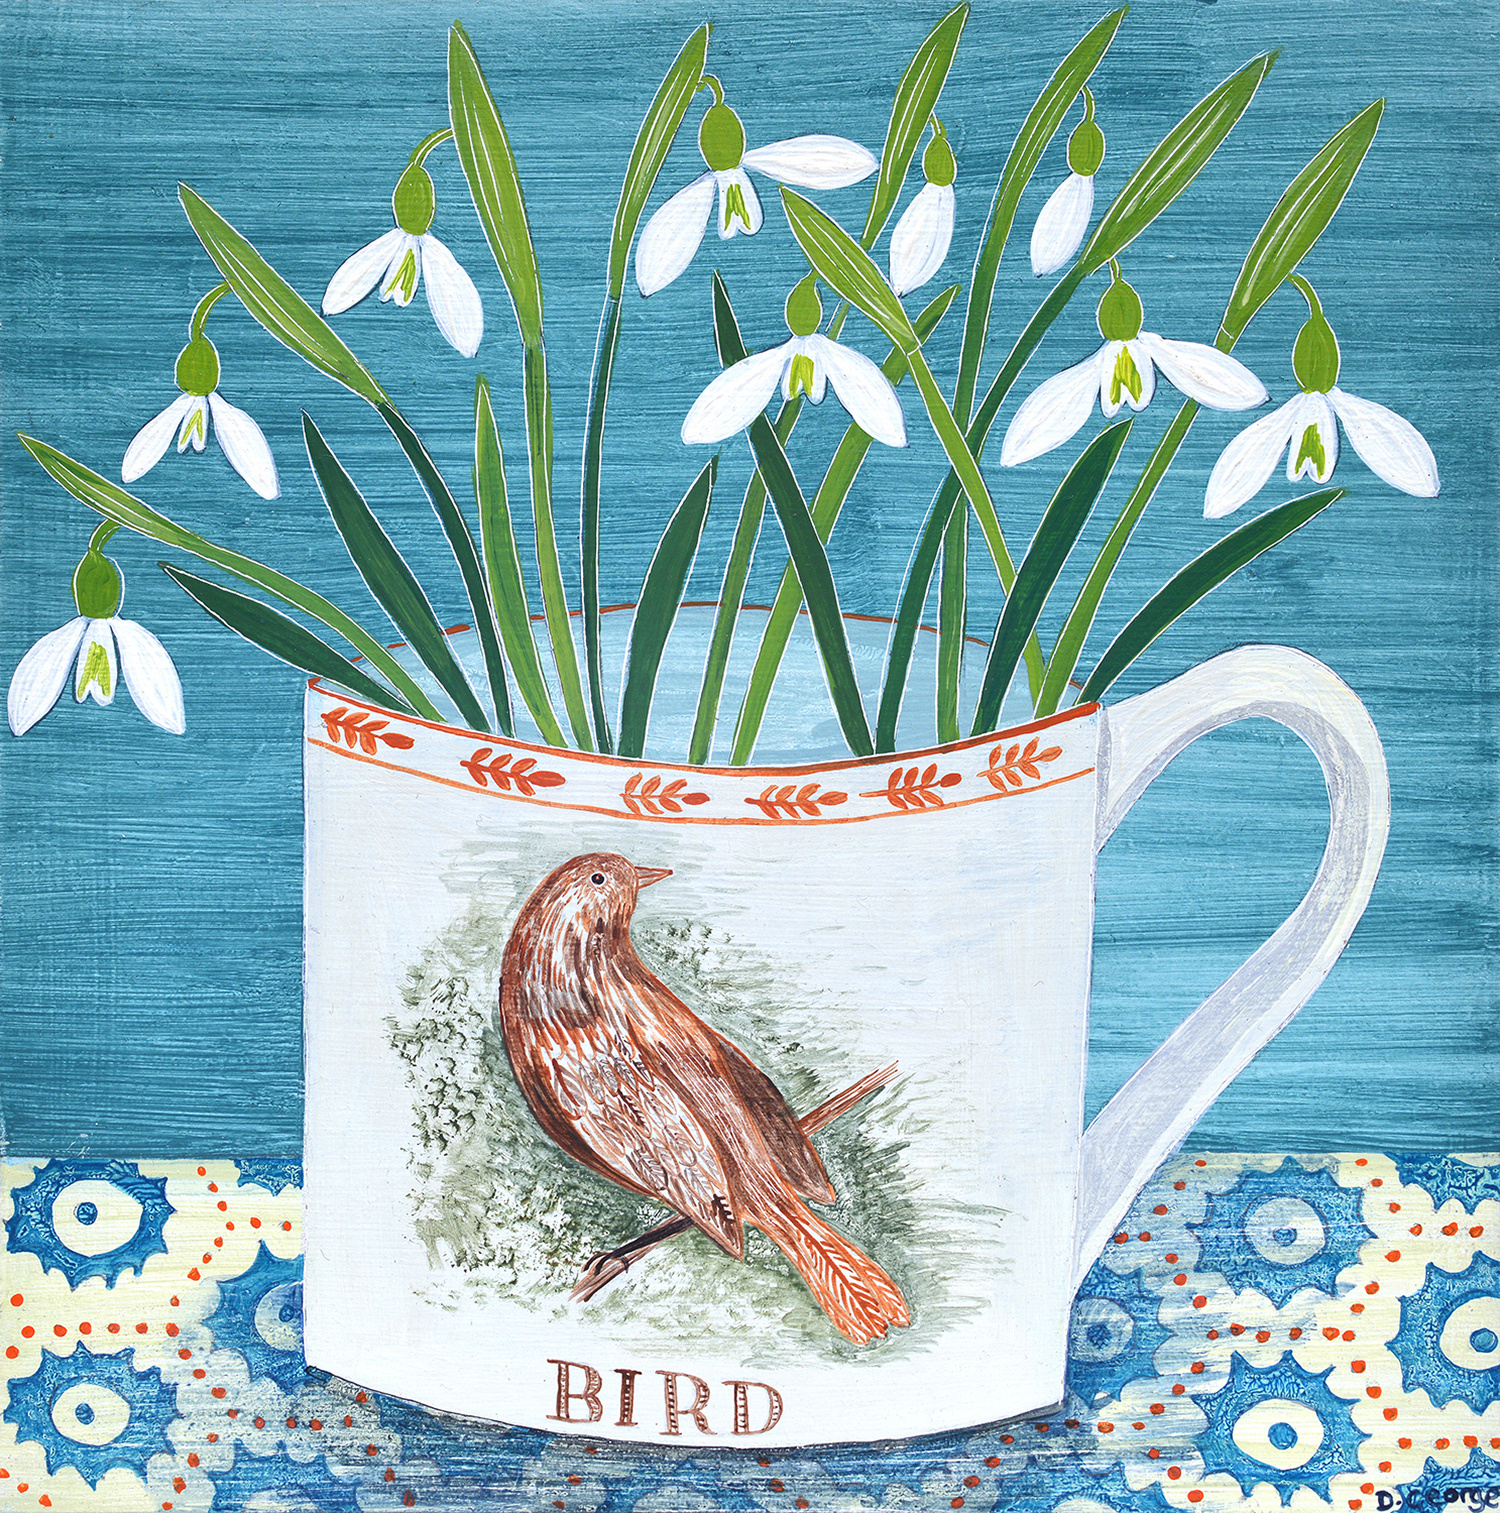 Bird Cup and Snowdrops by Debbie George